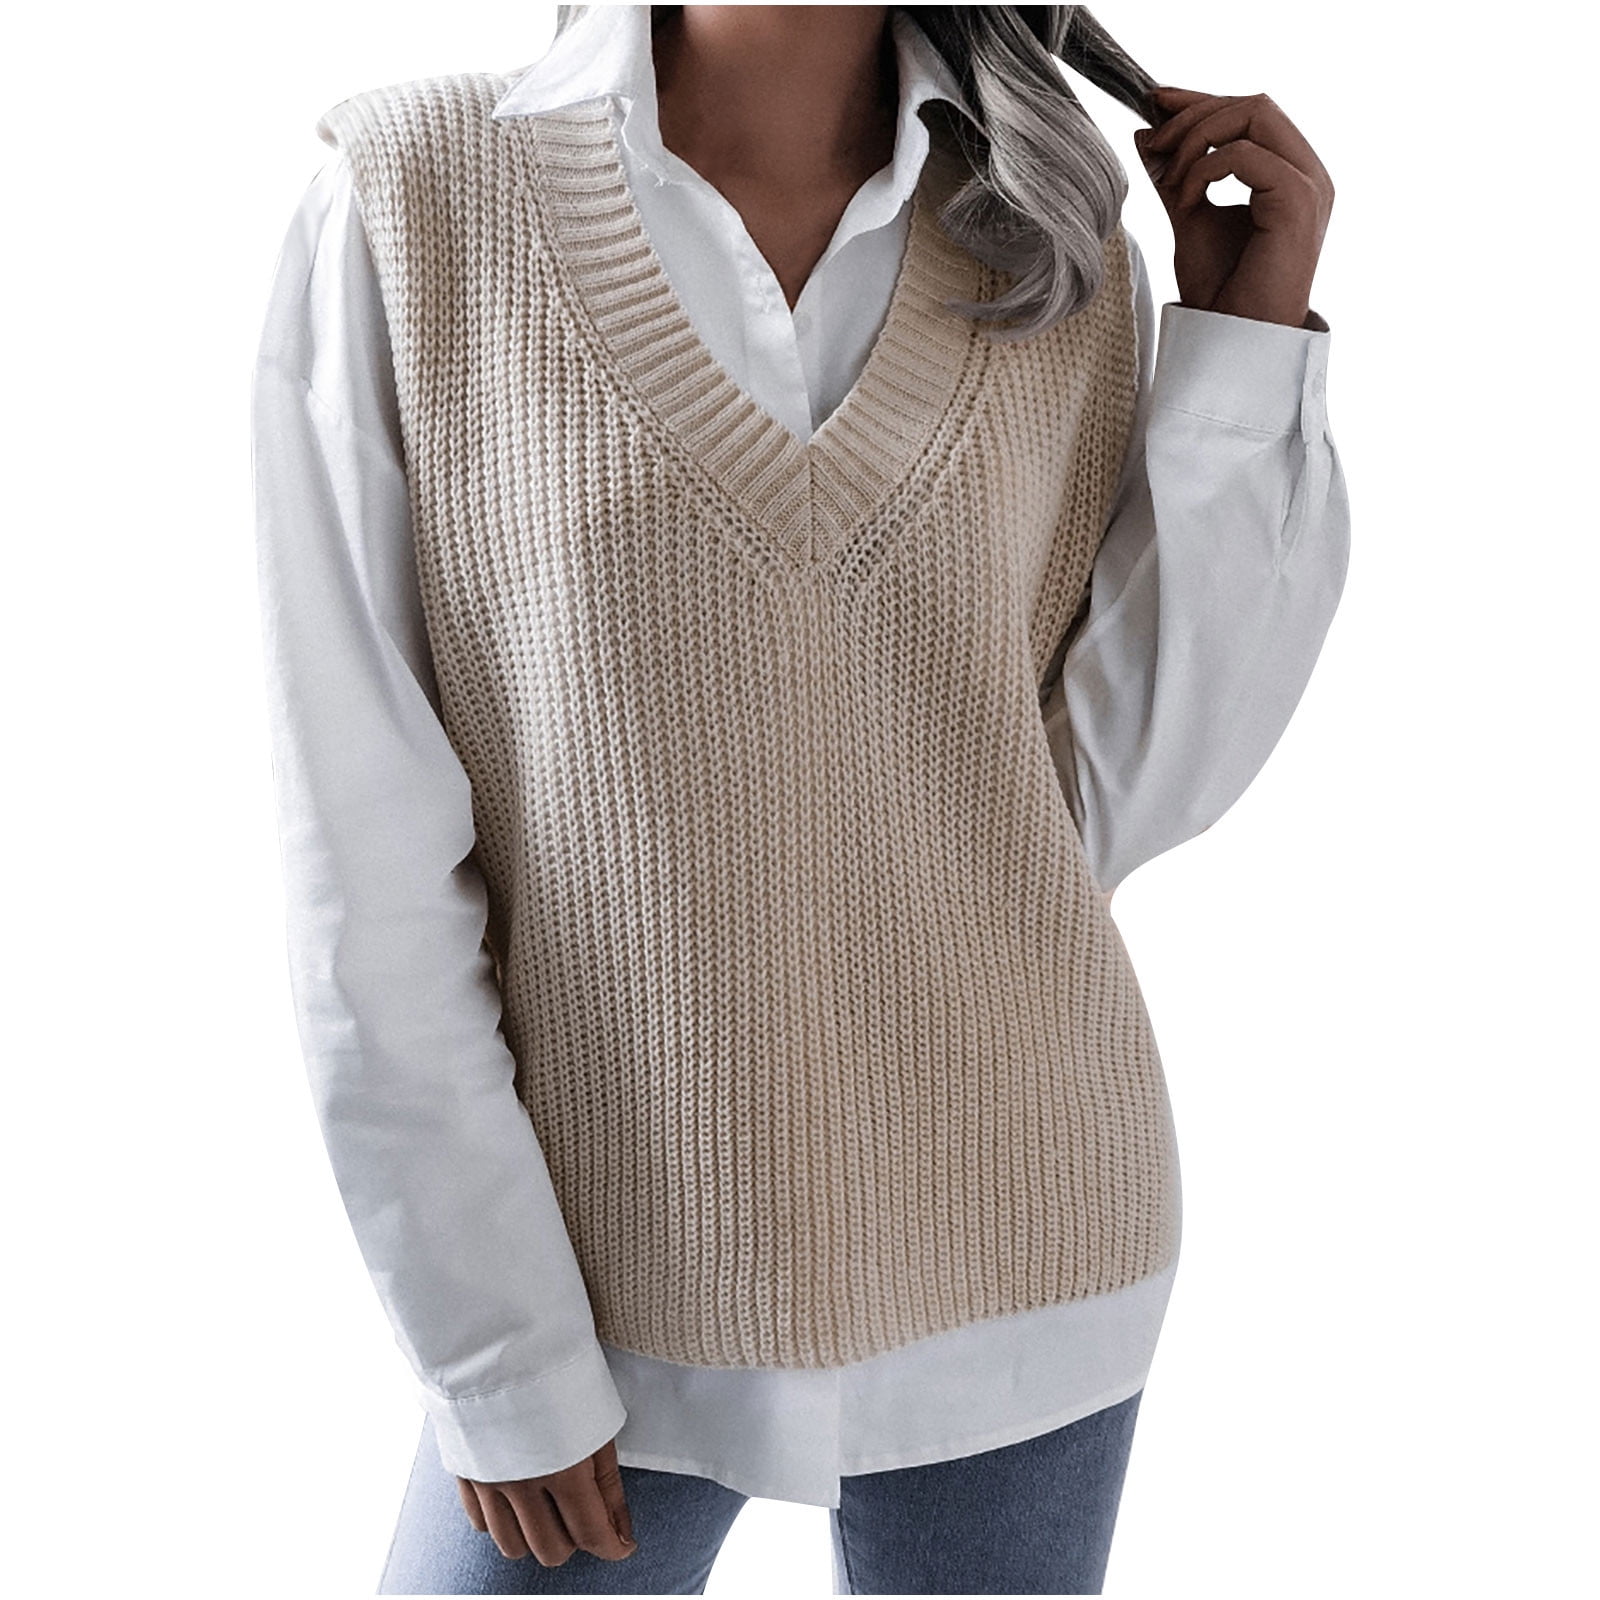 Aofany Fashion Casual Women Sweater Vest Loose V Neck Knitted Vest ...